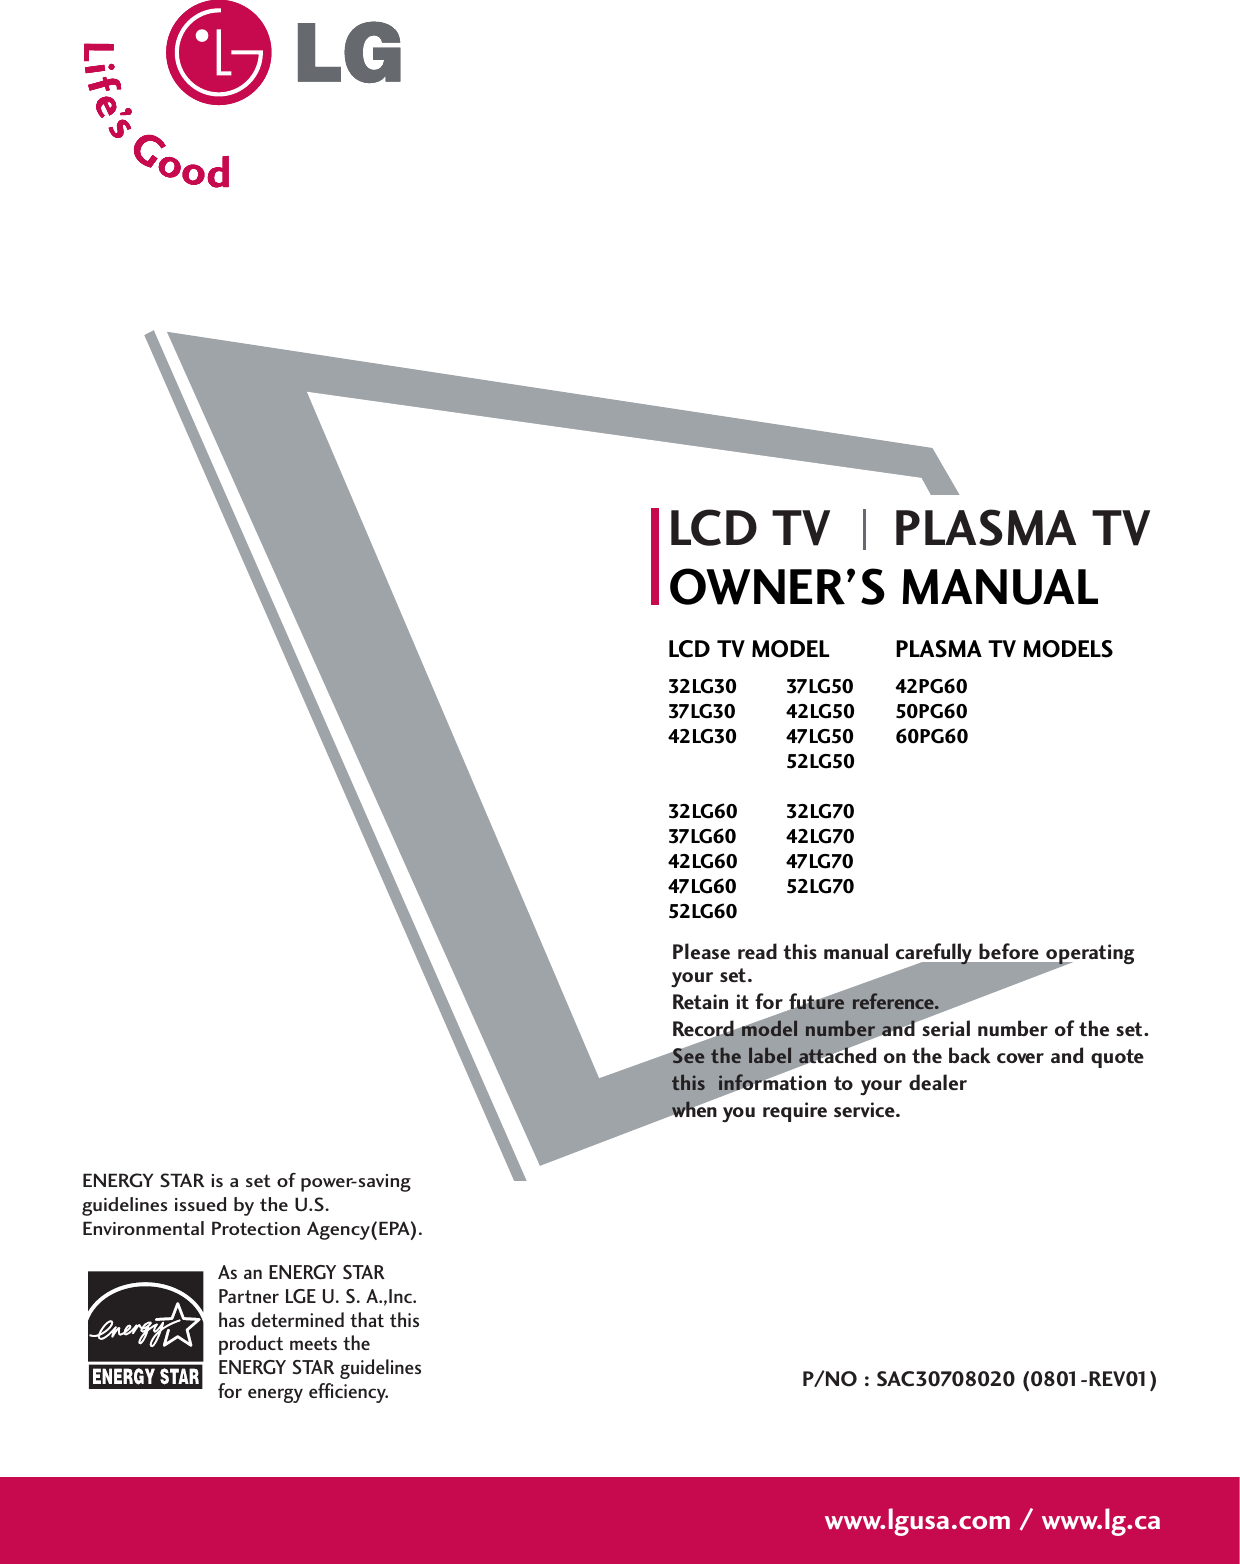 Please read this manual carefully before operatingyour set. Retain it for future reference.Record model number and serial number of the set. See the label attached on the back cover and quote this  information to your dealer when you require service.LCD TV PLASMA TVOWNER’S MANUALLCD TV MODEL32LG30 37LG5037LG30 42LG5042LG30 47LG5052LG5032LG60 32LG7037LG60 42LG7042LG60 47LG7047LG60 52LG7052LG60PLASMA TV MODELS42PG6050PG6060PG60P/NO : SAC30708020 (0801-REV01)www.lgusa.com / www.lg.caAs an ENERGY STARPartner LGE U. S. A.,Inc.has determined that thisproduct meets theENERGY STAR guidelinesfor energy efficiency.ENERGY STAR is a set of power-savingguidelines issued by the U.S.Environmental Protection Agency(EPA).